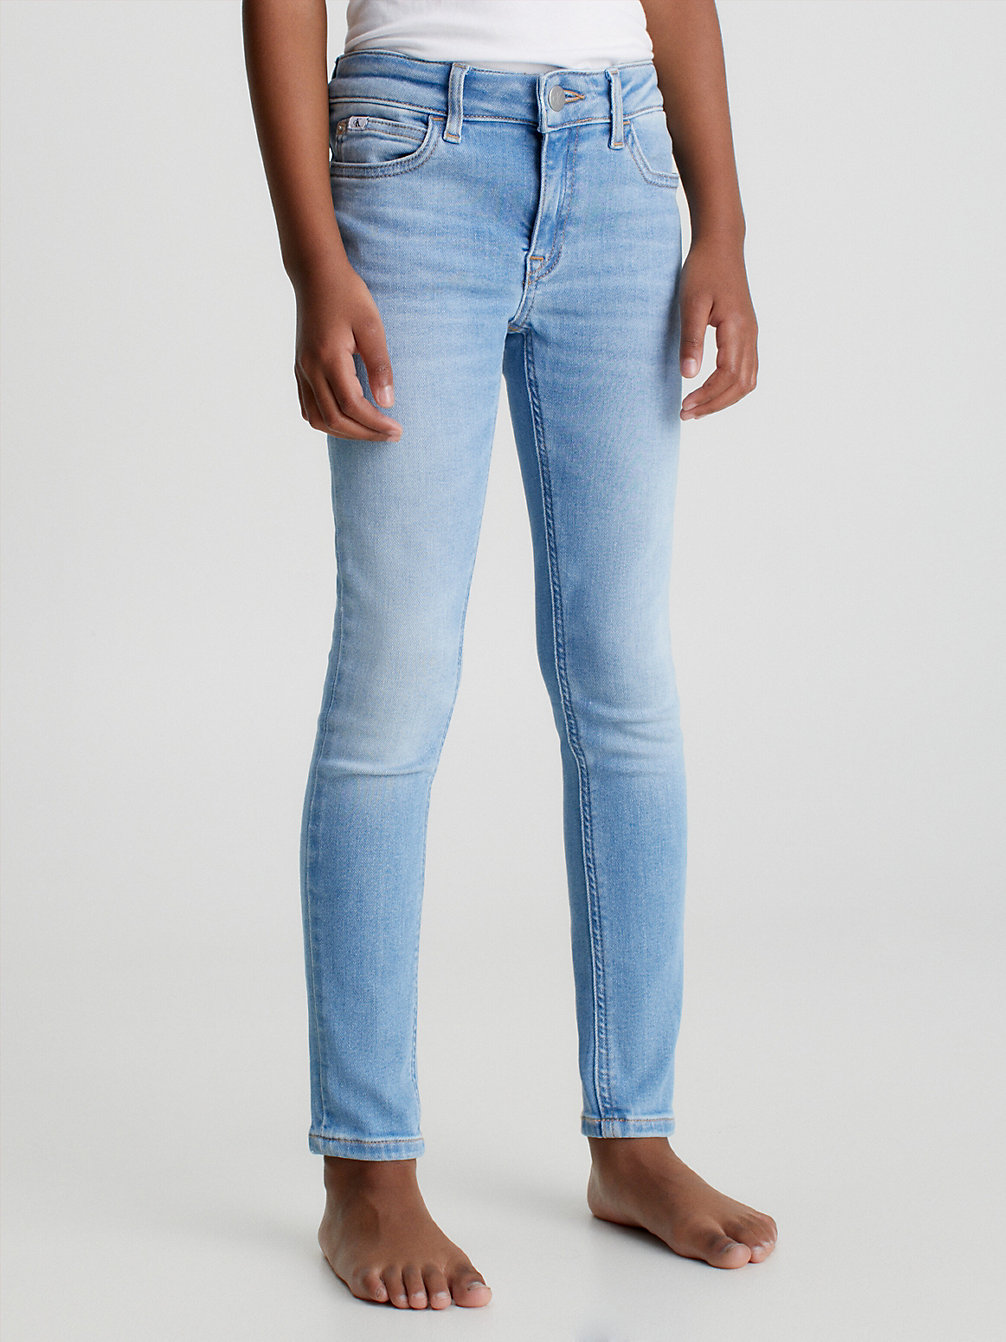 ESS MID BLUE Jean Skinny Mid Rise undefined girls Calvin Klein